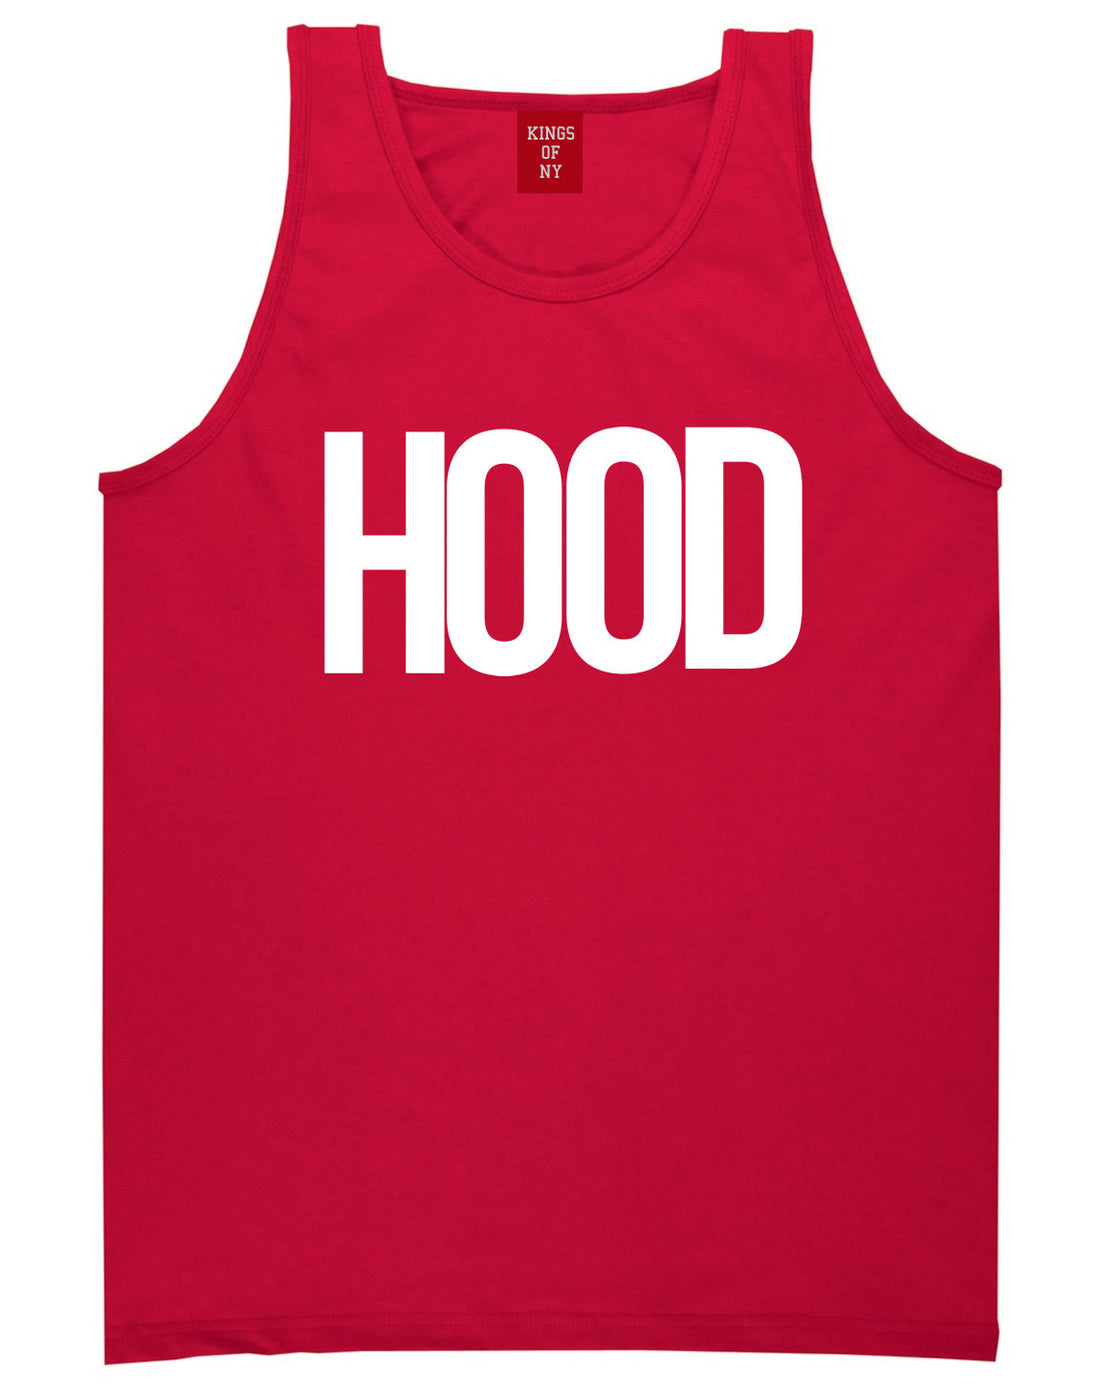 Hood Trap Style Compton New York Air Tank Top In Red by Kings Of NY